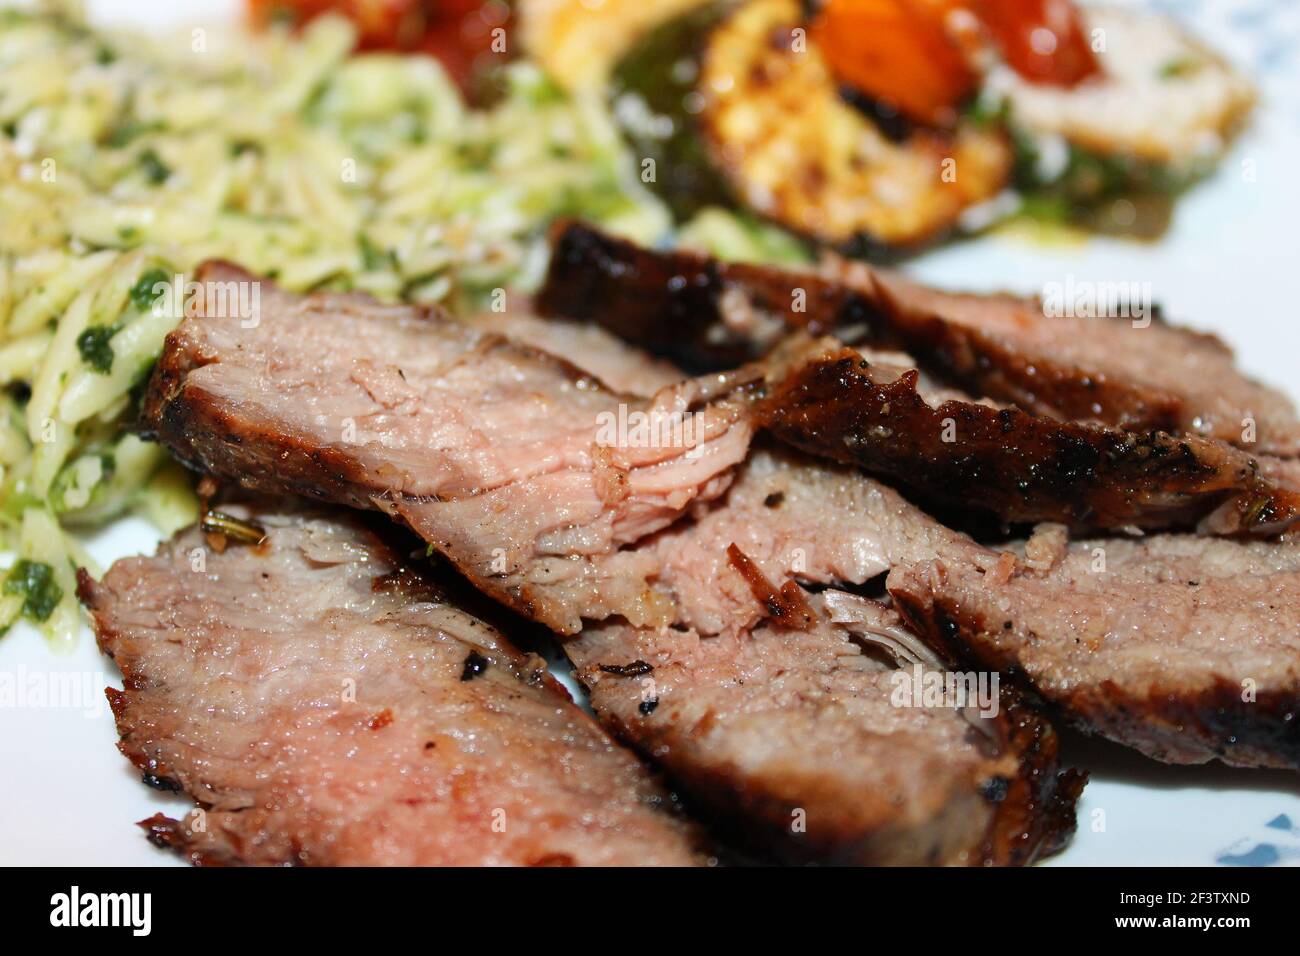 Close-up of sliced baked pork, with basmati rice and fried zucchini and cherry tomatoes out of focus in background. Stock Photo